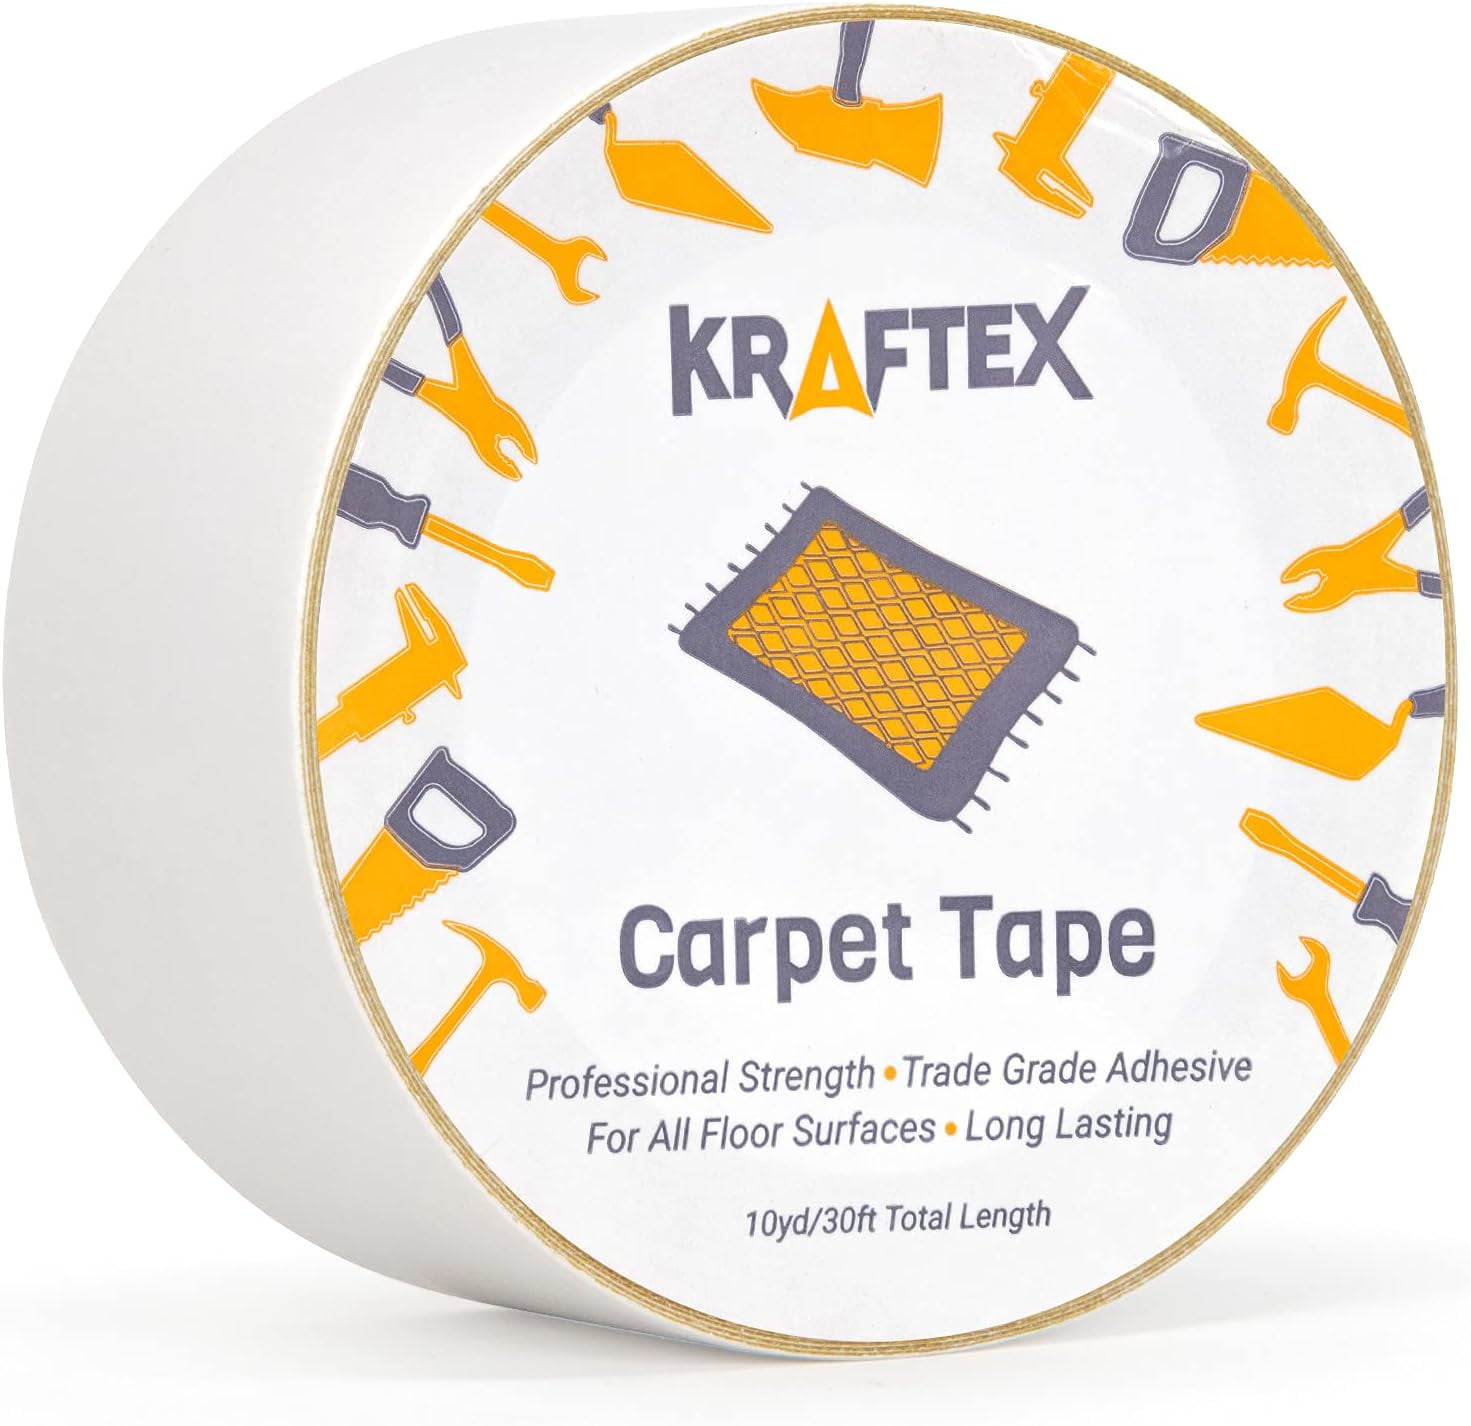 Atack Carpet Tape for Area Rugs and Carpets, Removable, 4 inch by 30 Yards, Ideal for Stair Treads, Rugs, Carpets Over Carpets or Del ATCT430